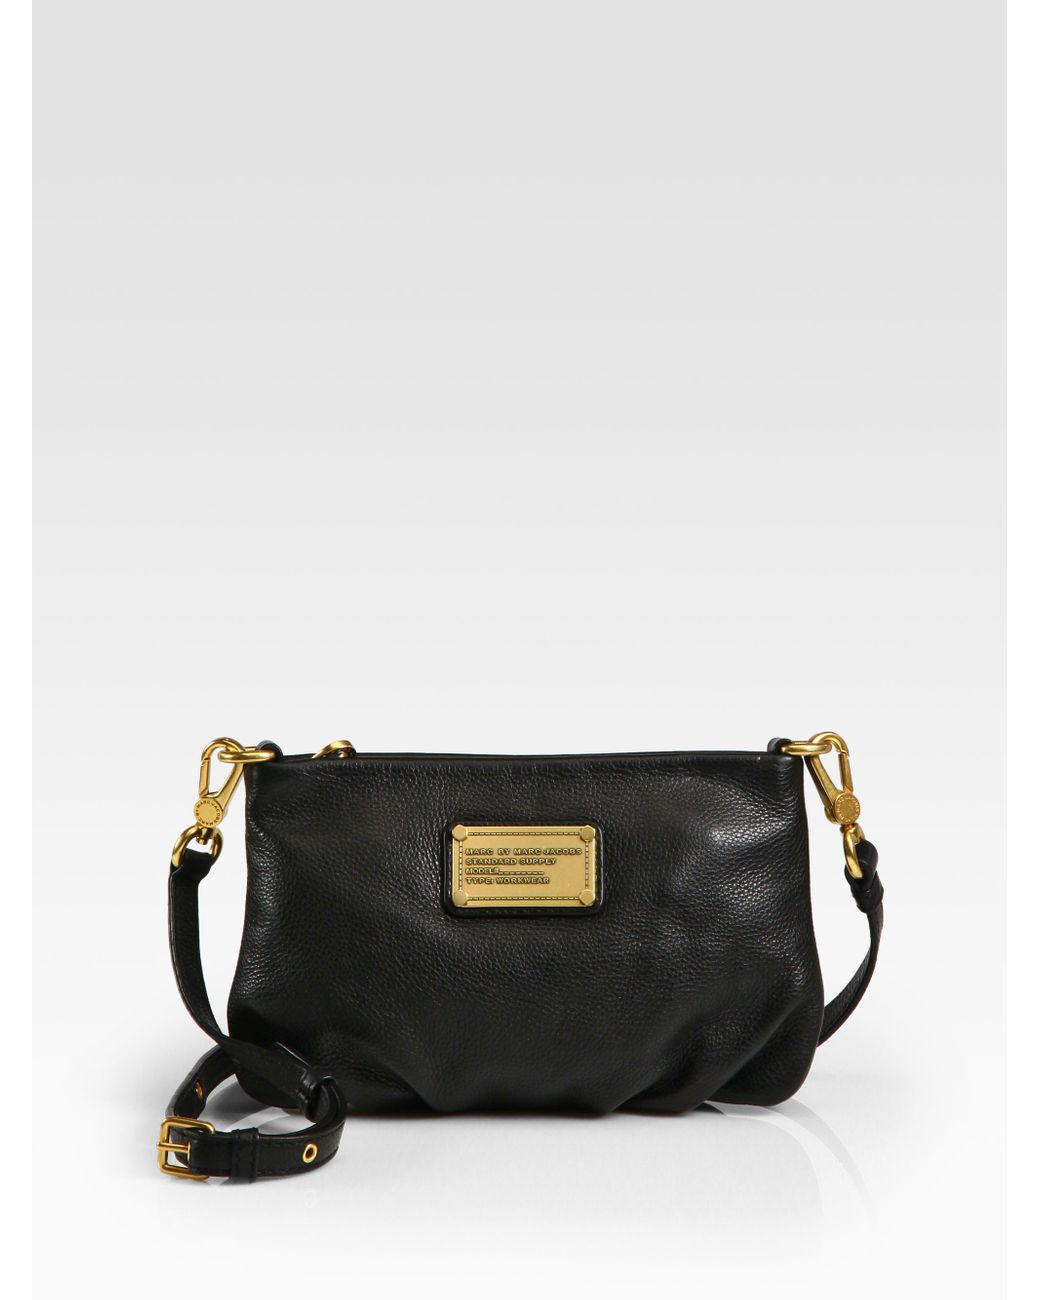 Marc By Marc Jacobs Classic Q Percy Leather Cross-Body Bag in Black | Lyst